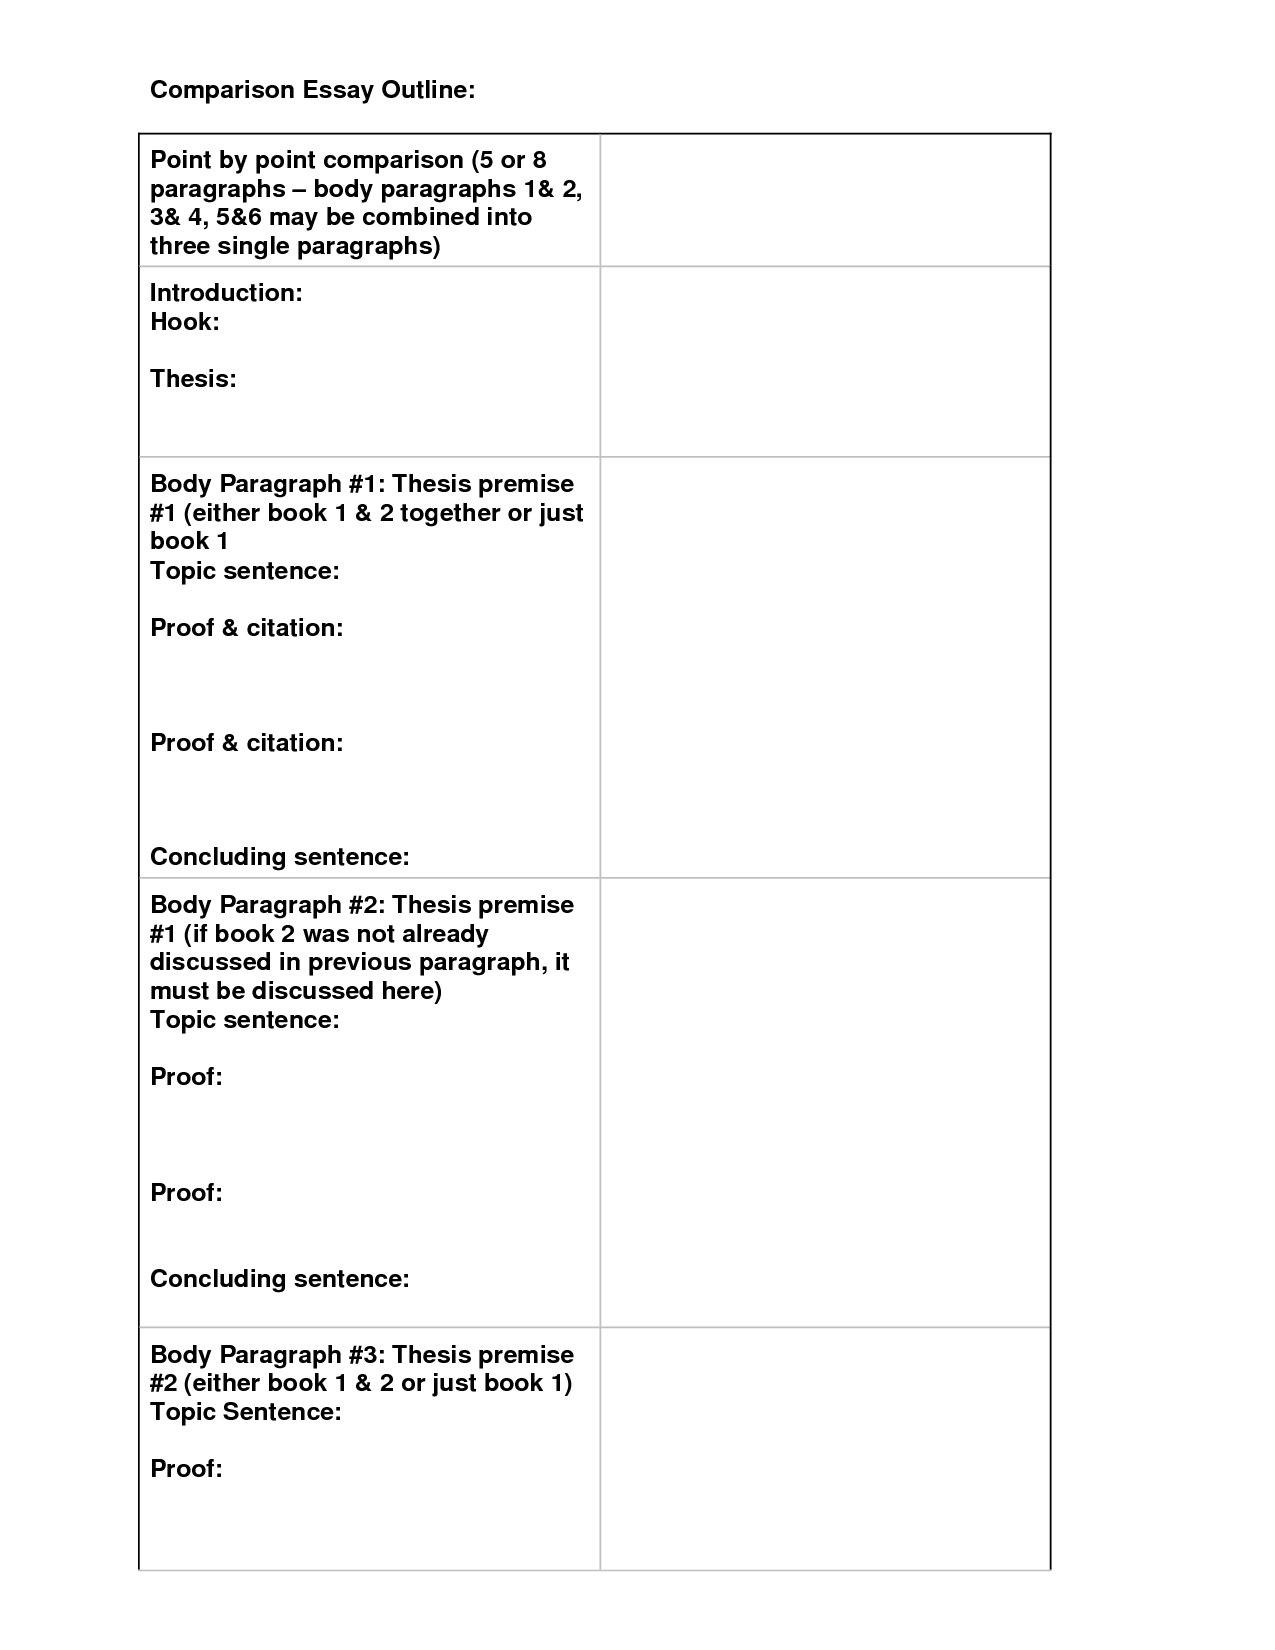 Compare and contrast essay outline template